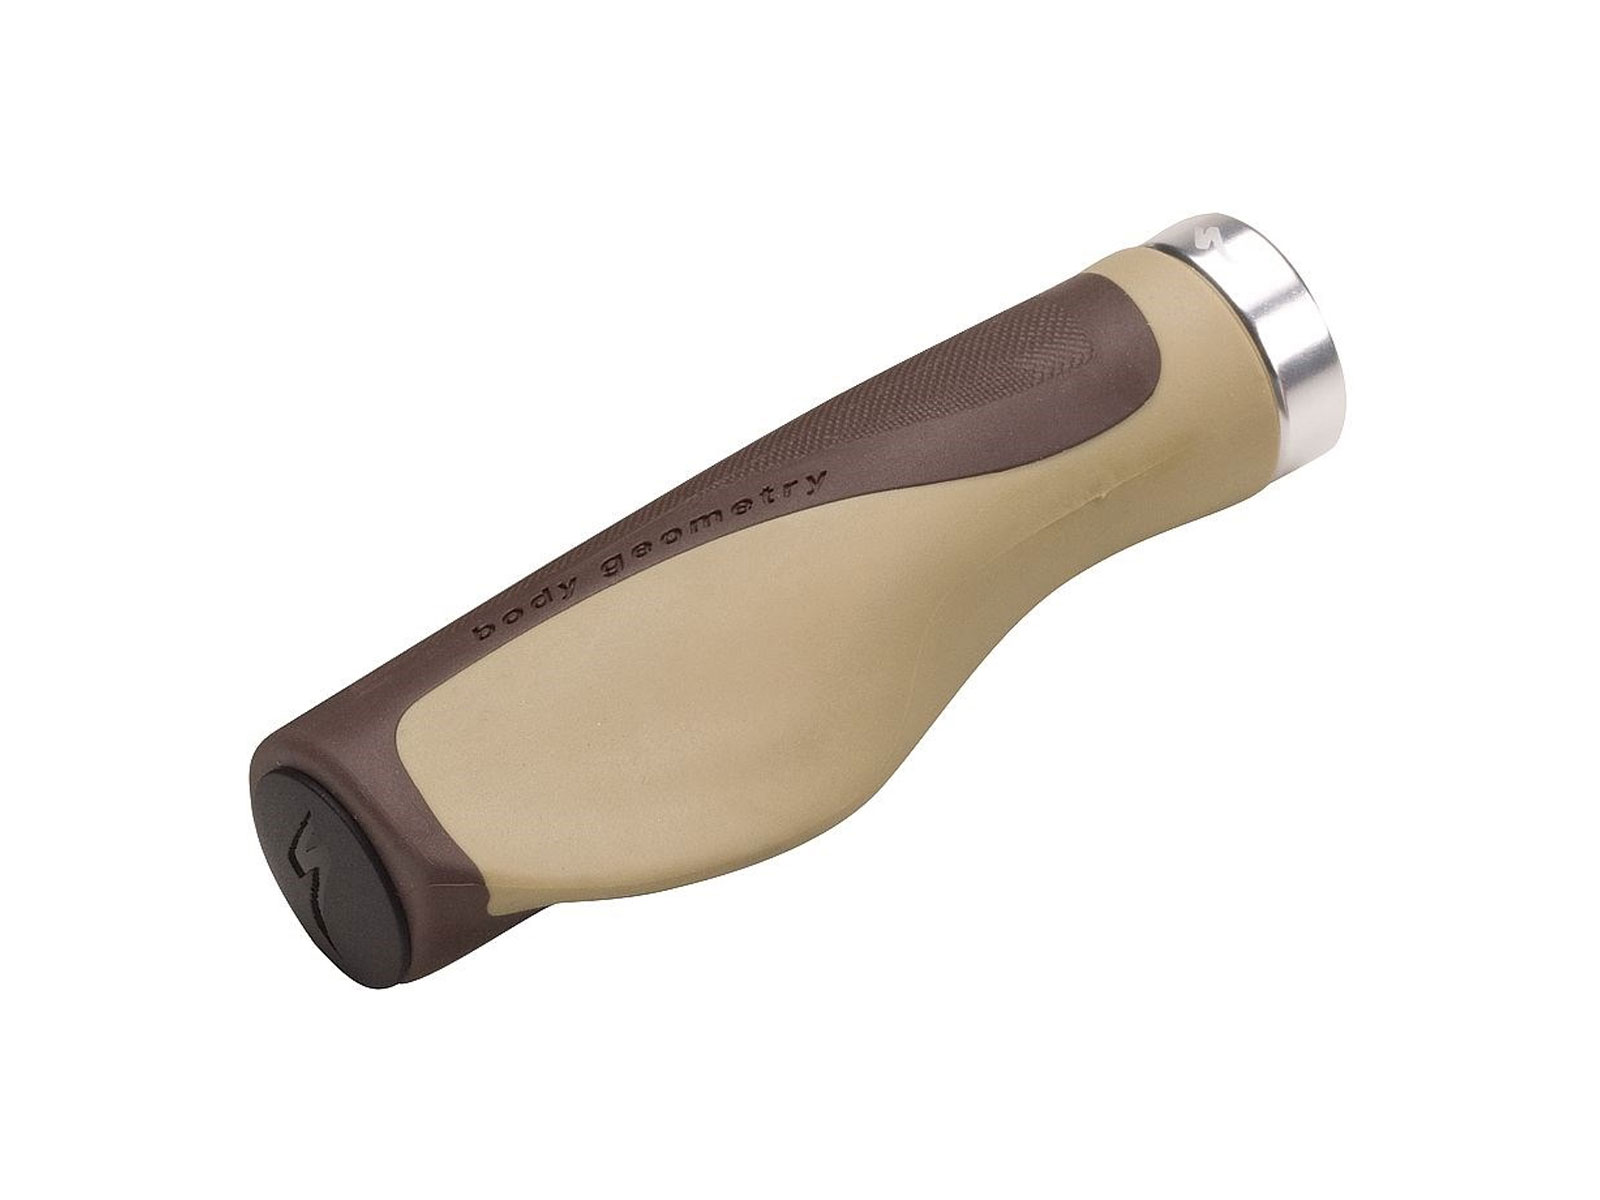 Specialized BG Contour Locking Grips - Brown (X-Large)